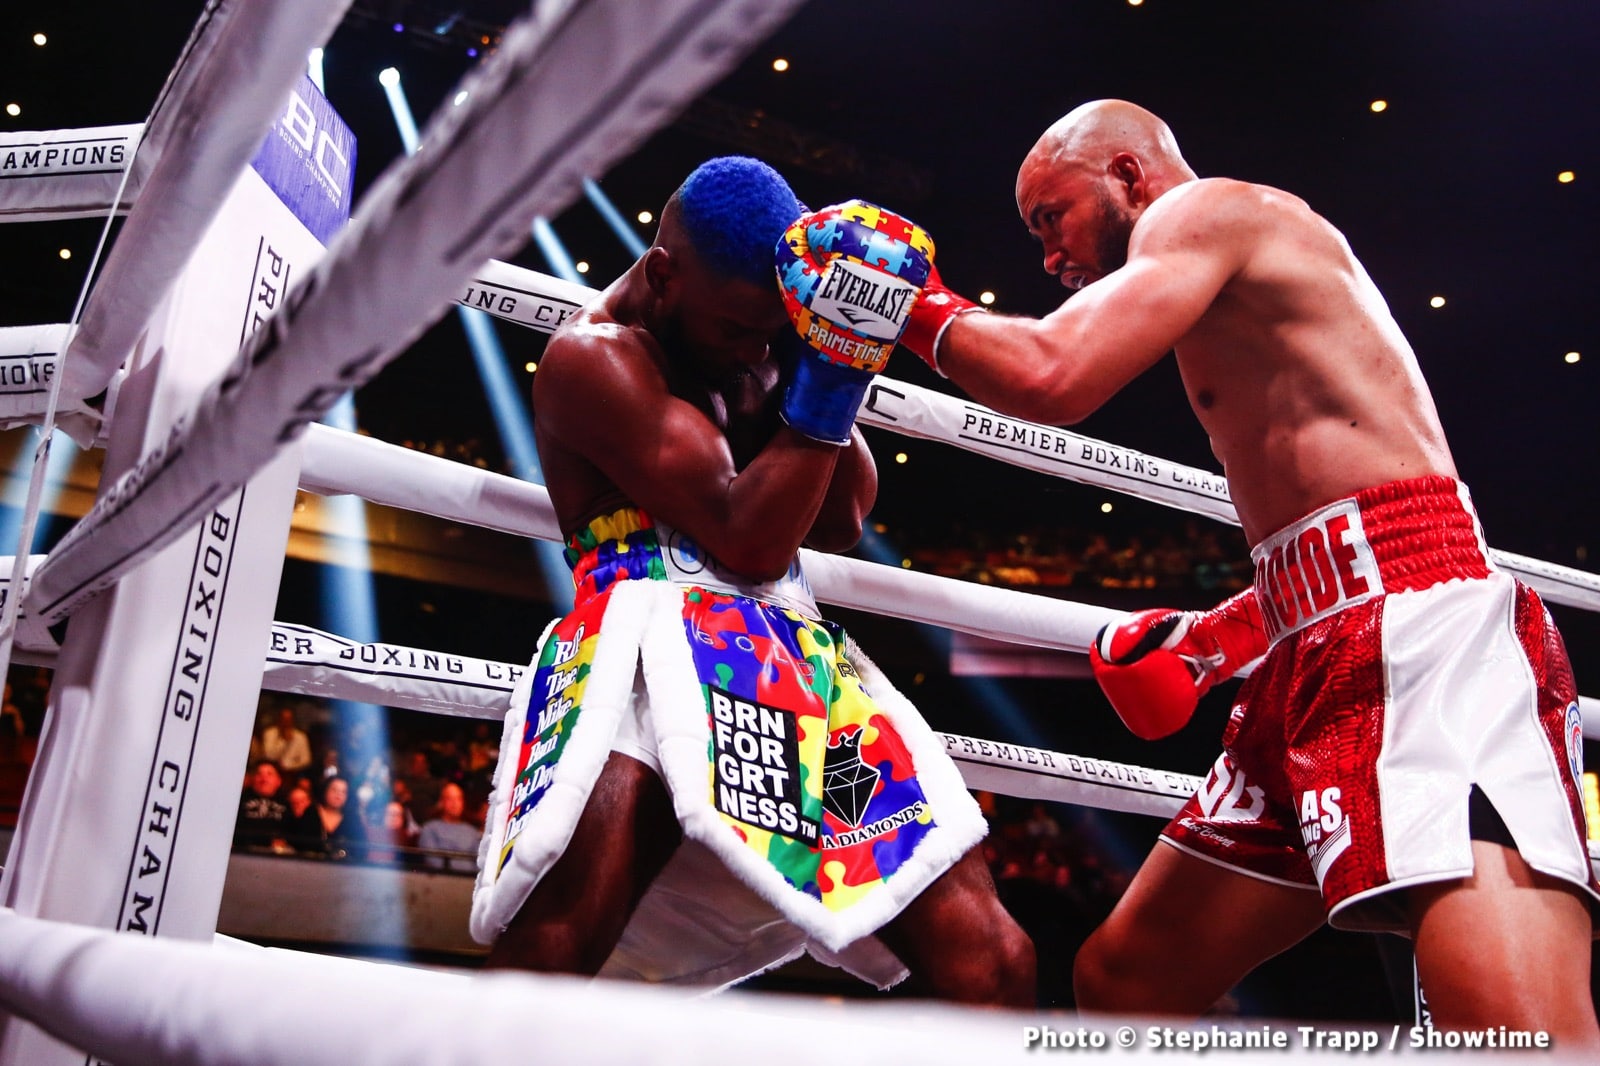 Image: Chris Colbert wants rematch with Hector Garcia after defeat